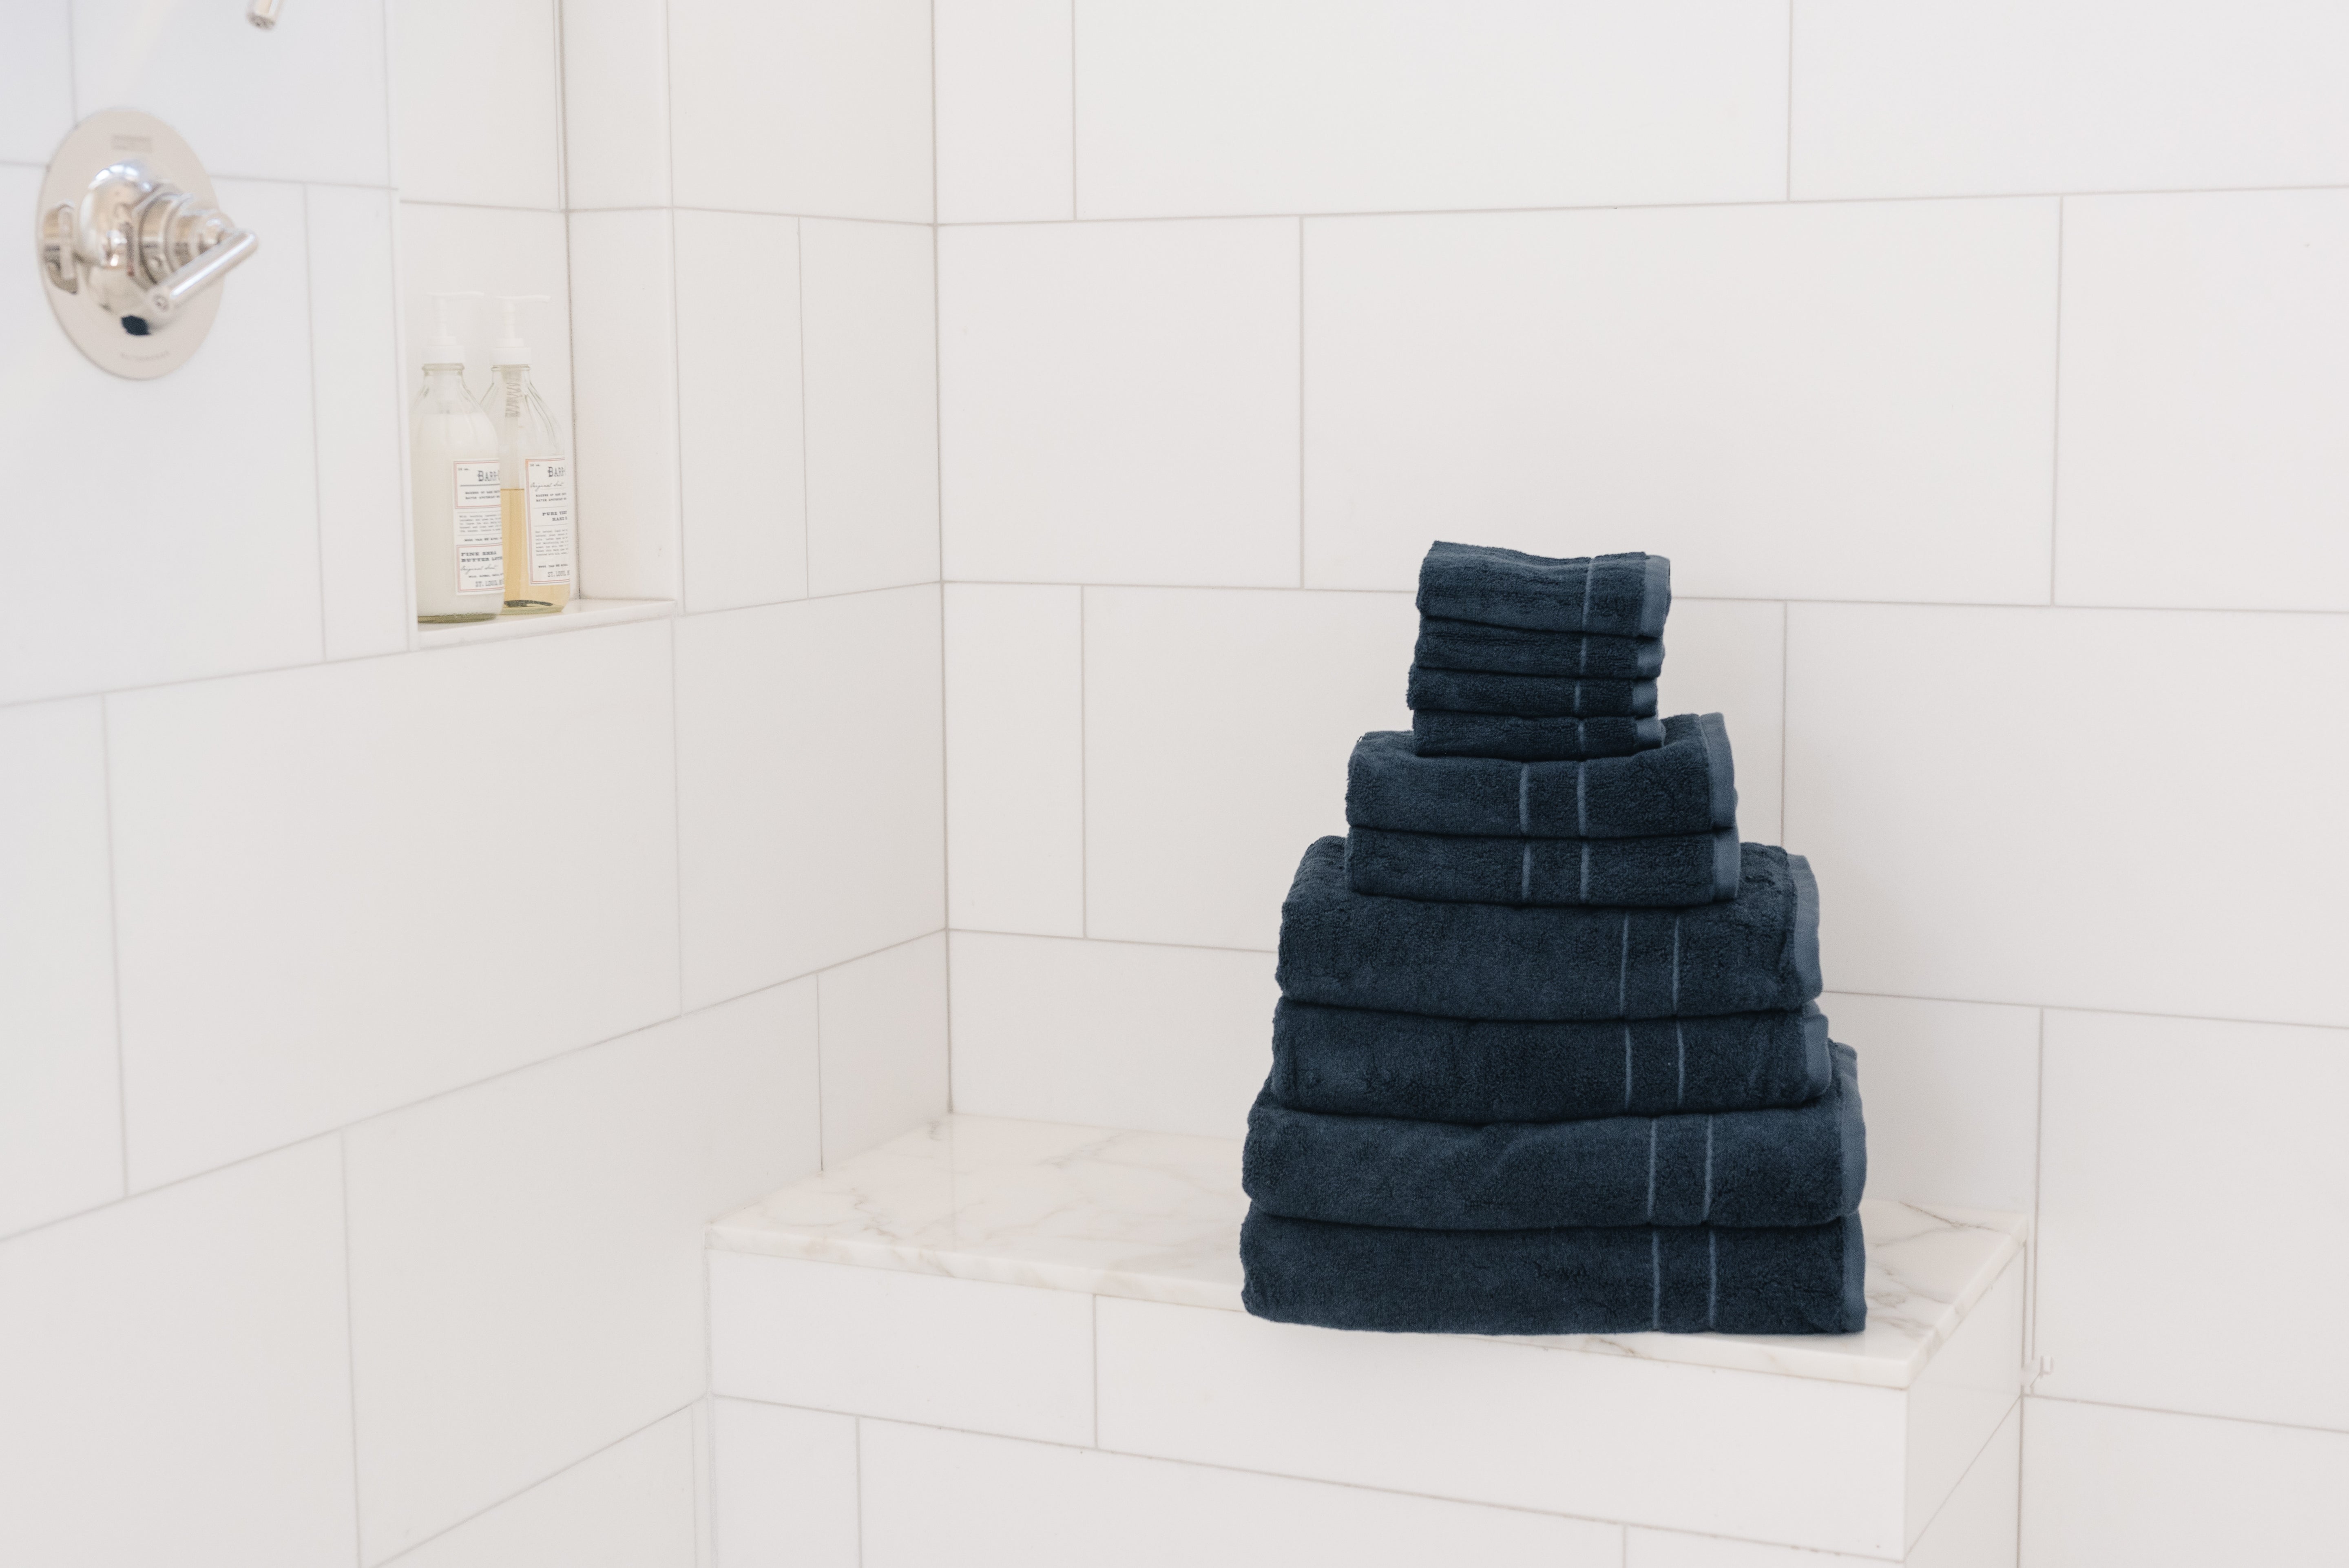 Complete Premium Plush Bath Bundle in the color Dusk. Photo of Dusk Complete Premium Plush Bath Bundle taken in a bathroom with white walls. |Color:Dusk